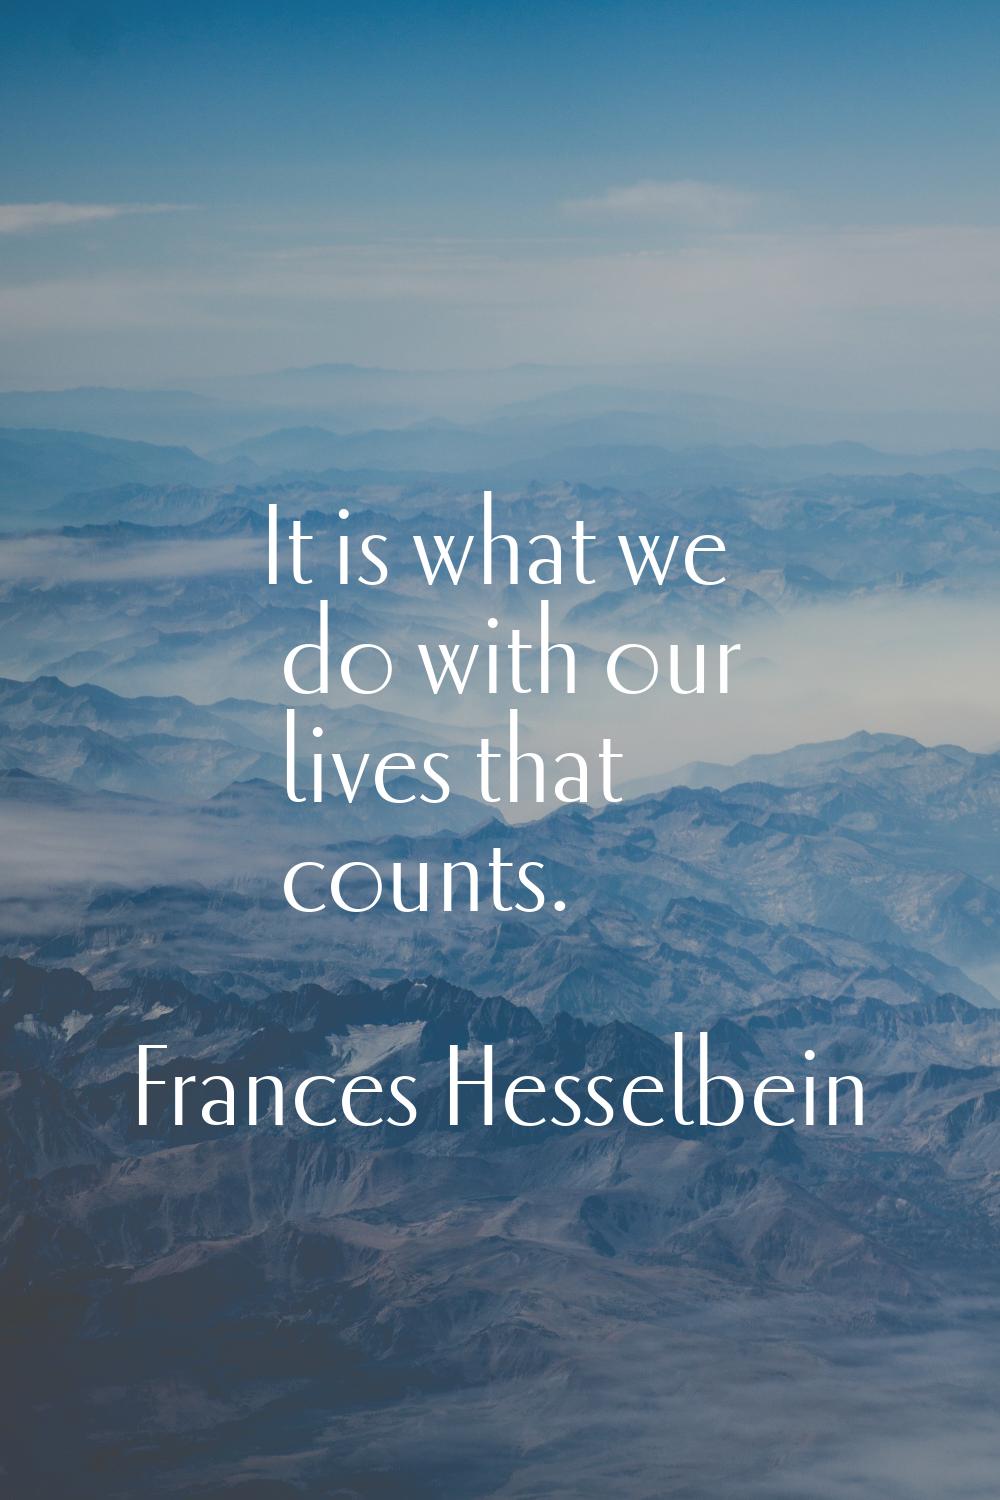 It is what we do with our lives that counts.